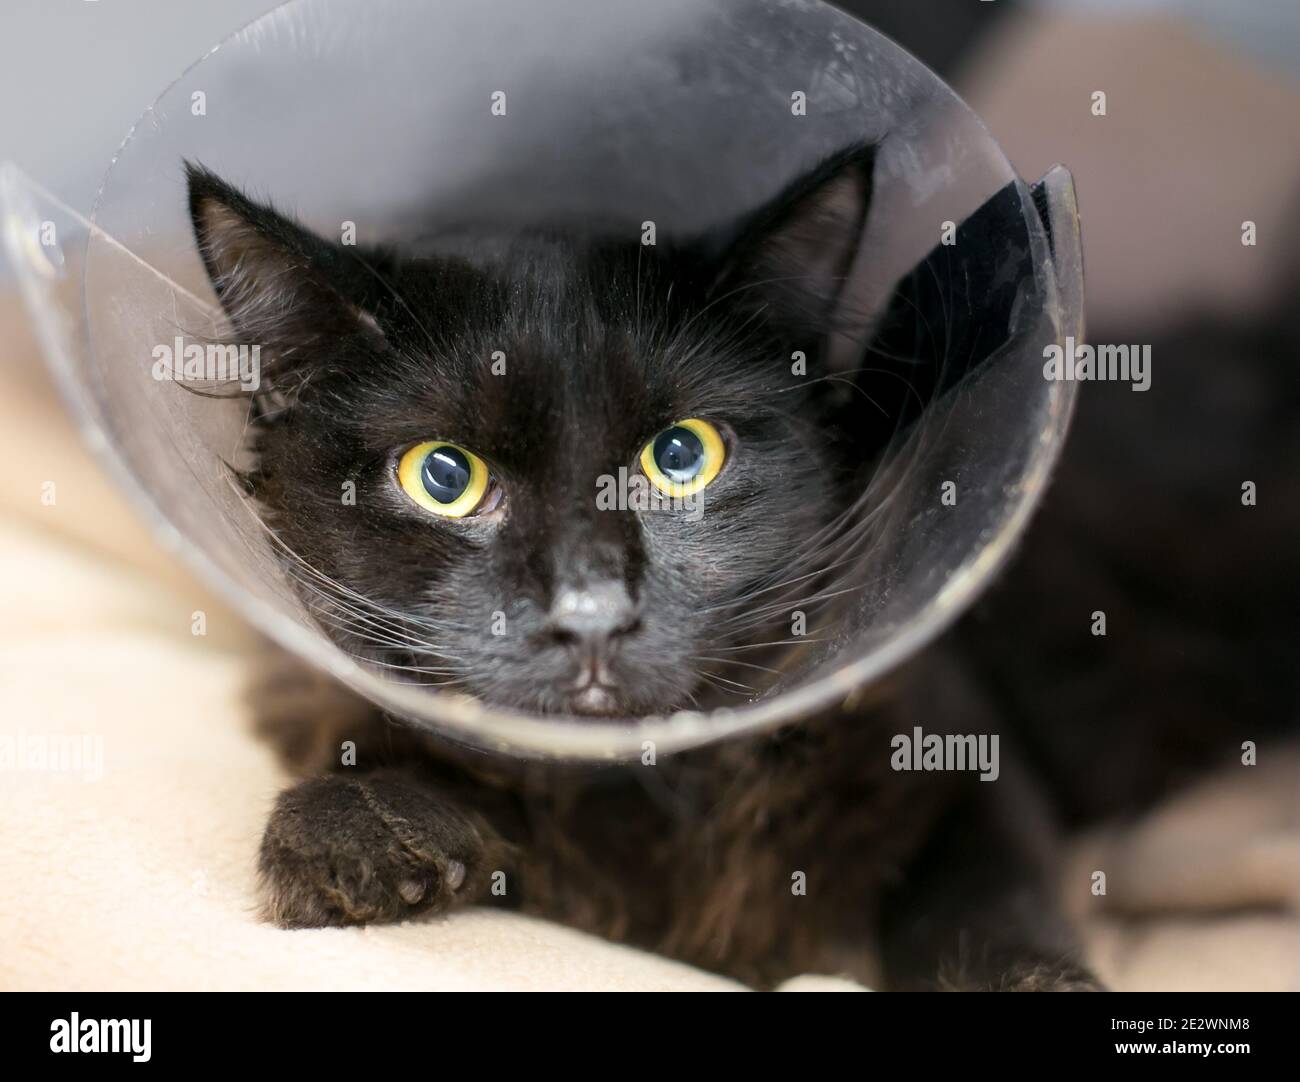 A black shorthair cat with yellow eyes and dilated pupils wearing a protective Elizabethan collar after a medical procedure Stock Photo